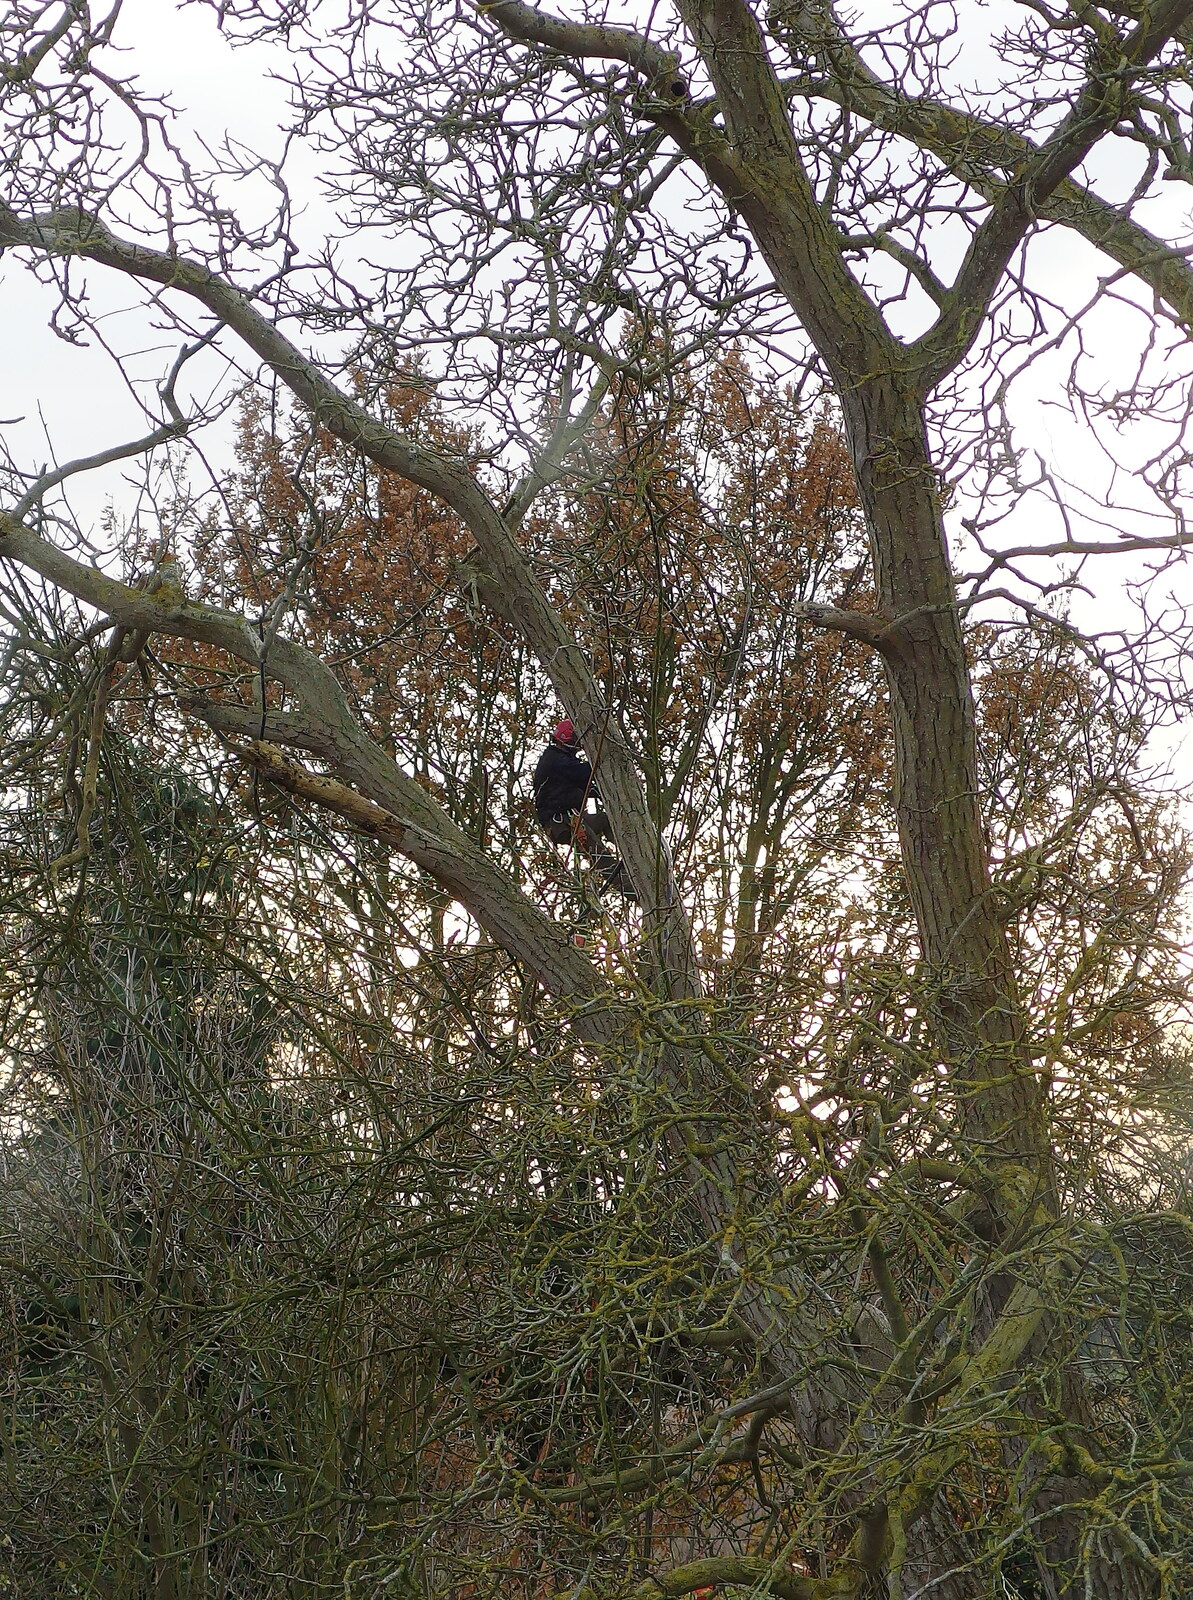 There's a bloke up the tree in the garden from Saturday Café Life, Diss, Norfolk - 14th December 2013